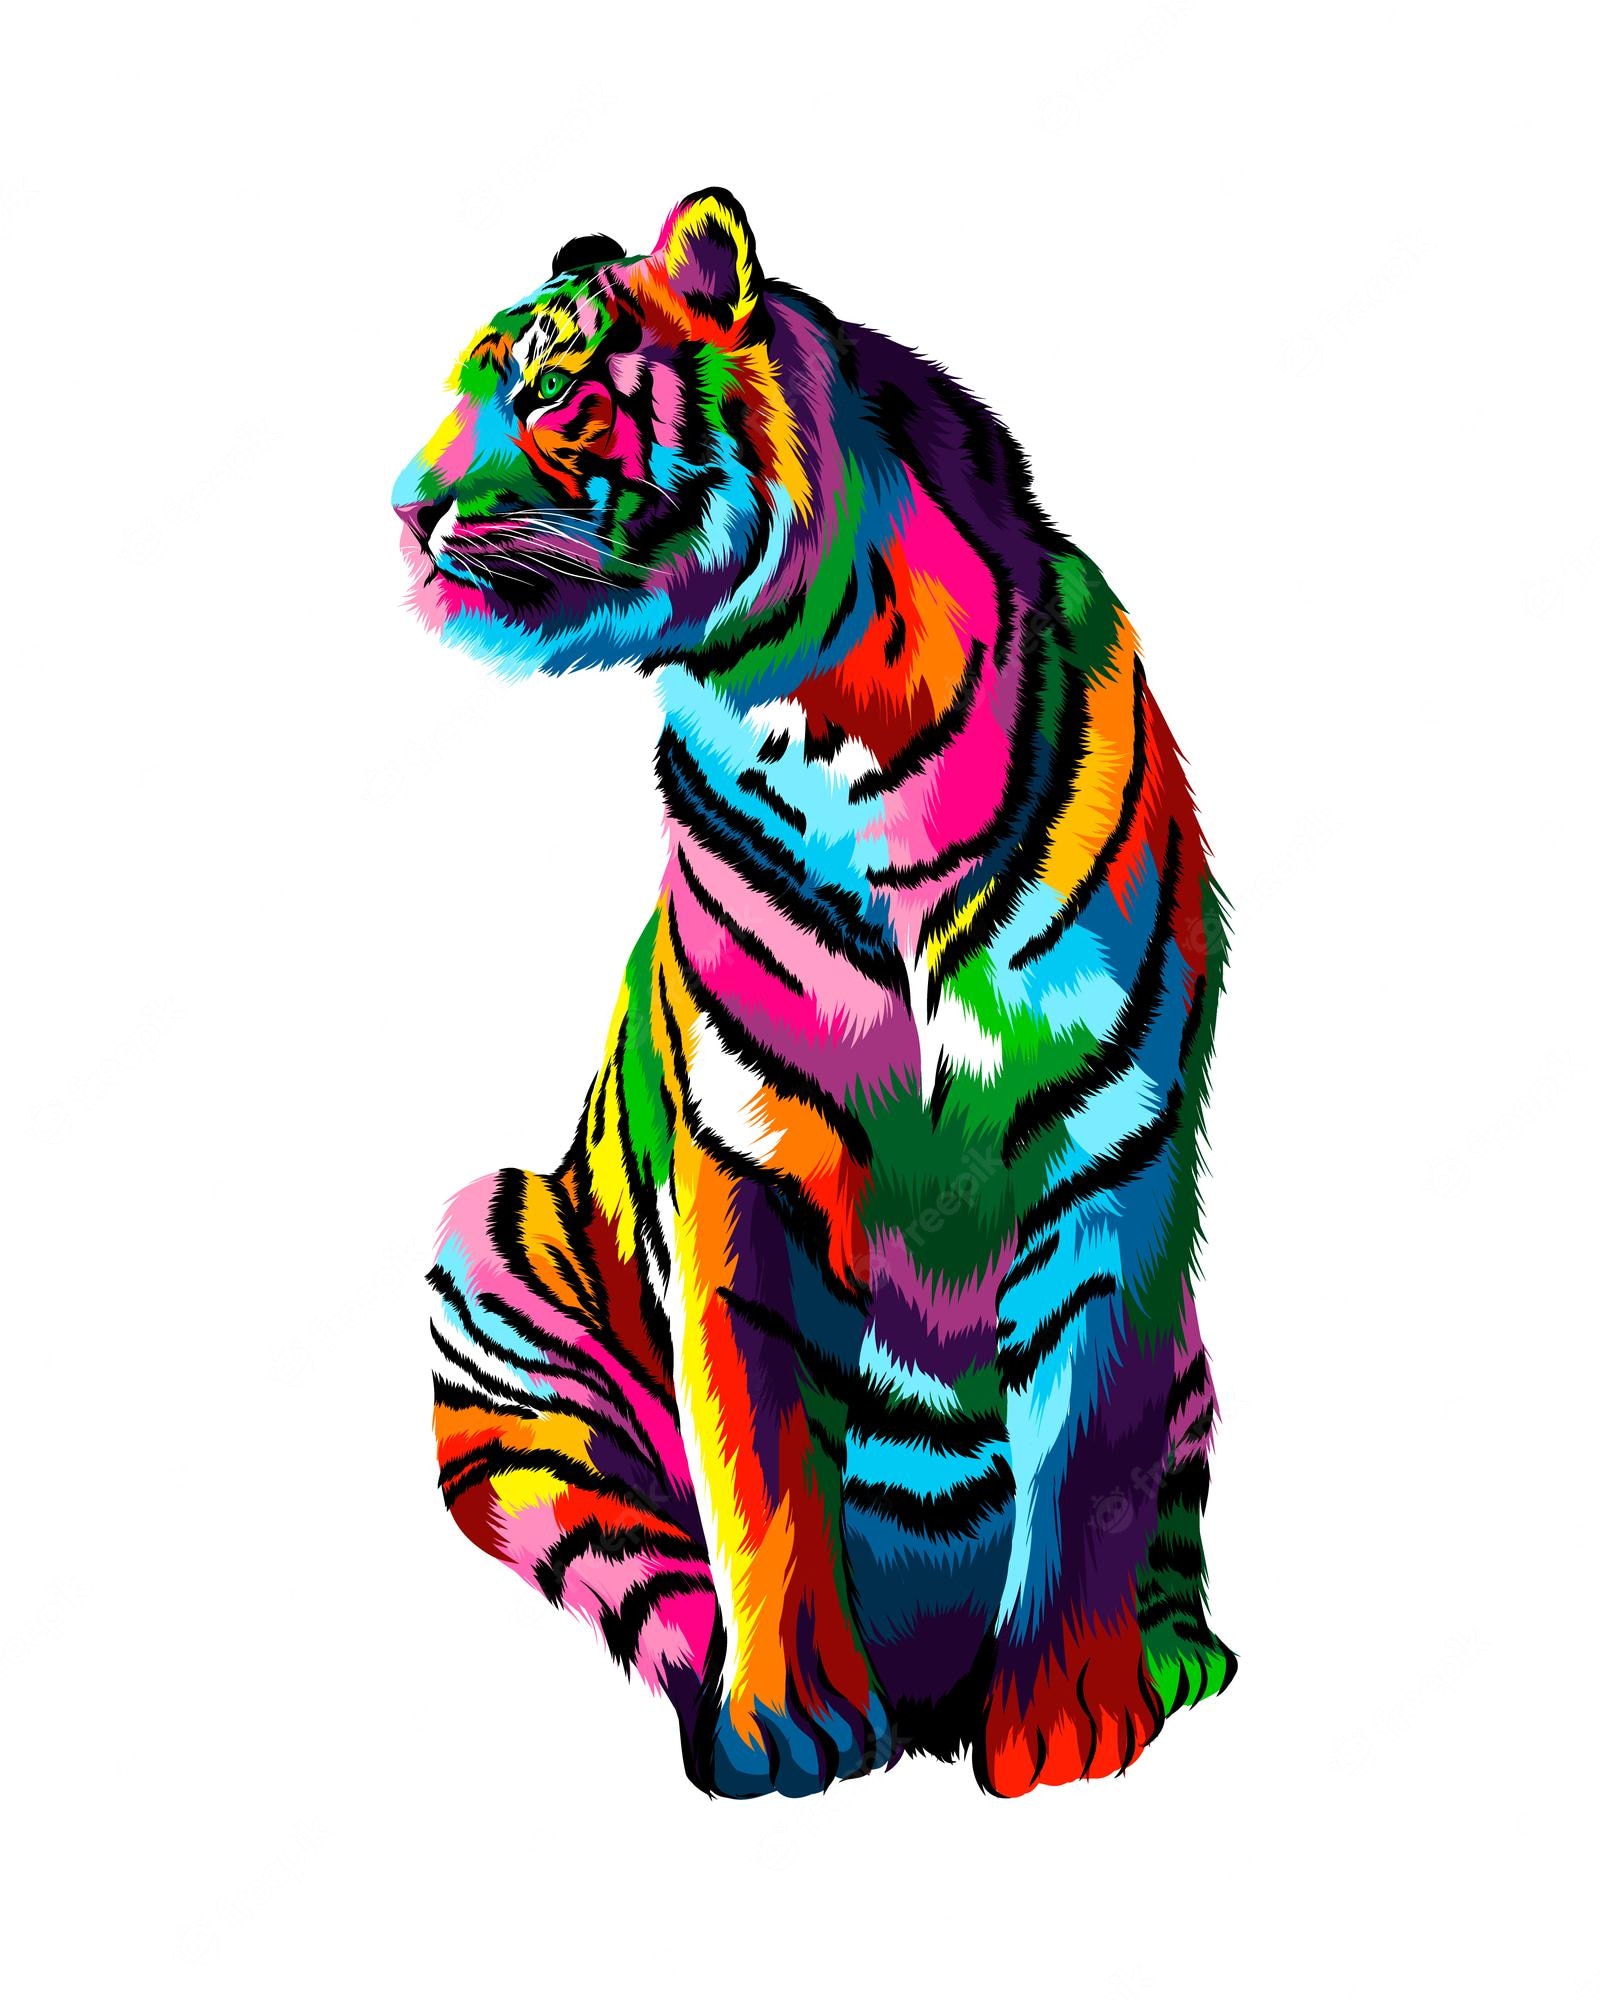 Rainbow Tiger Sticker by TheDesignosaur - Clip Art Library